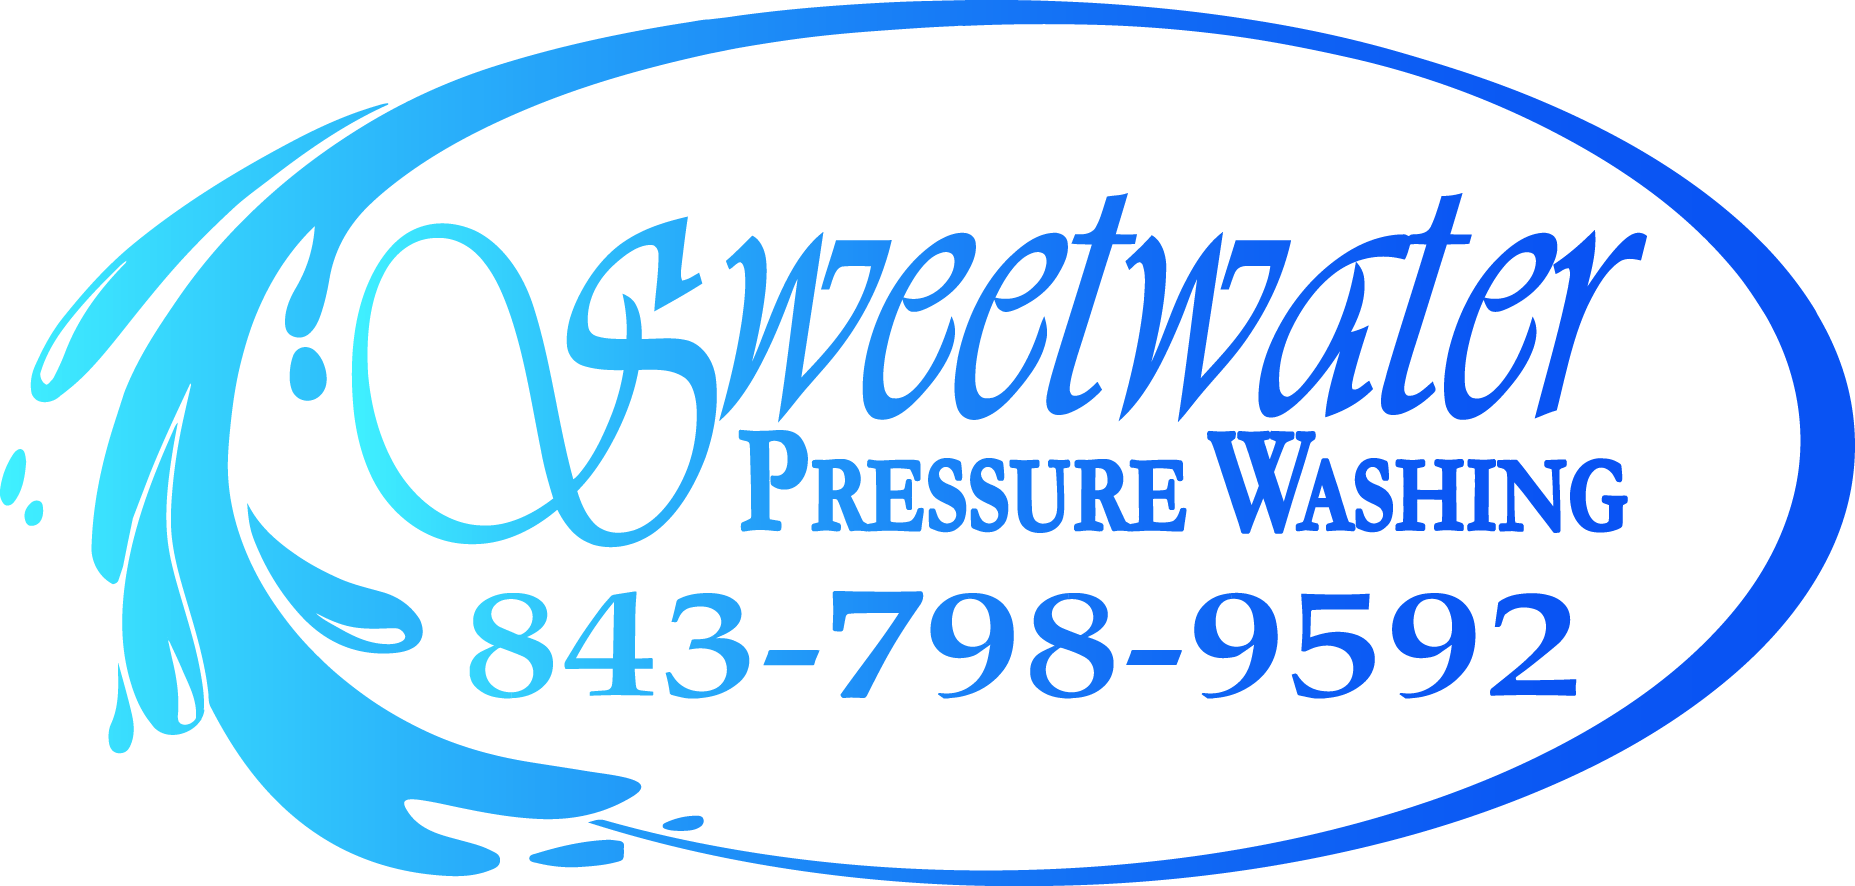 Commercial Pressure Washing in Myrtle Beach Logo